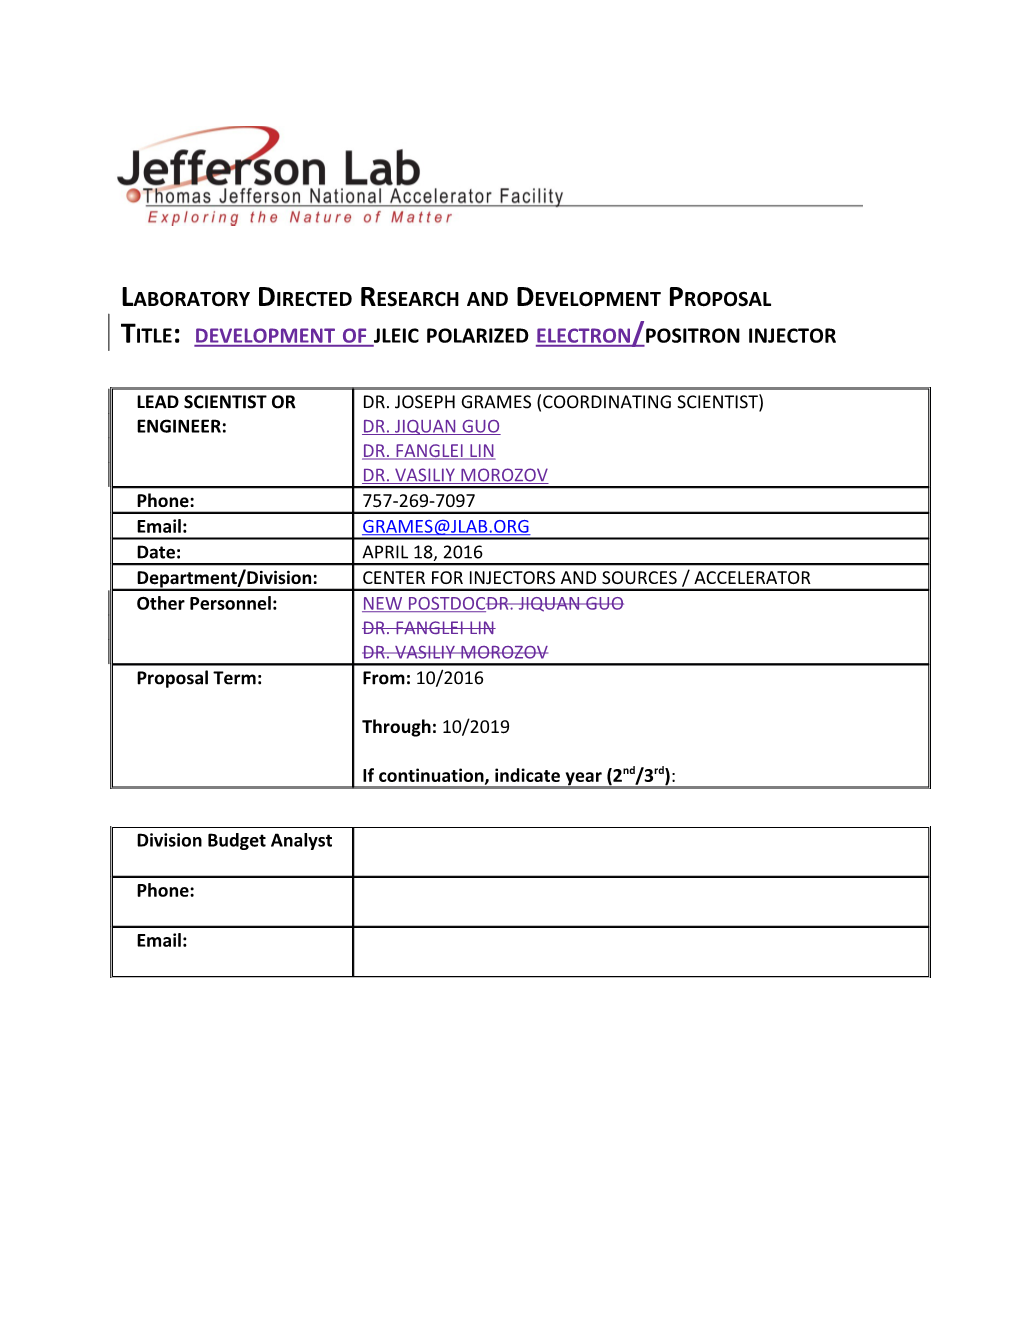 Laboratory Directed Research and Development Proposal Title: Development of Jleic Polarized